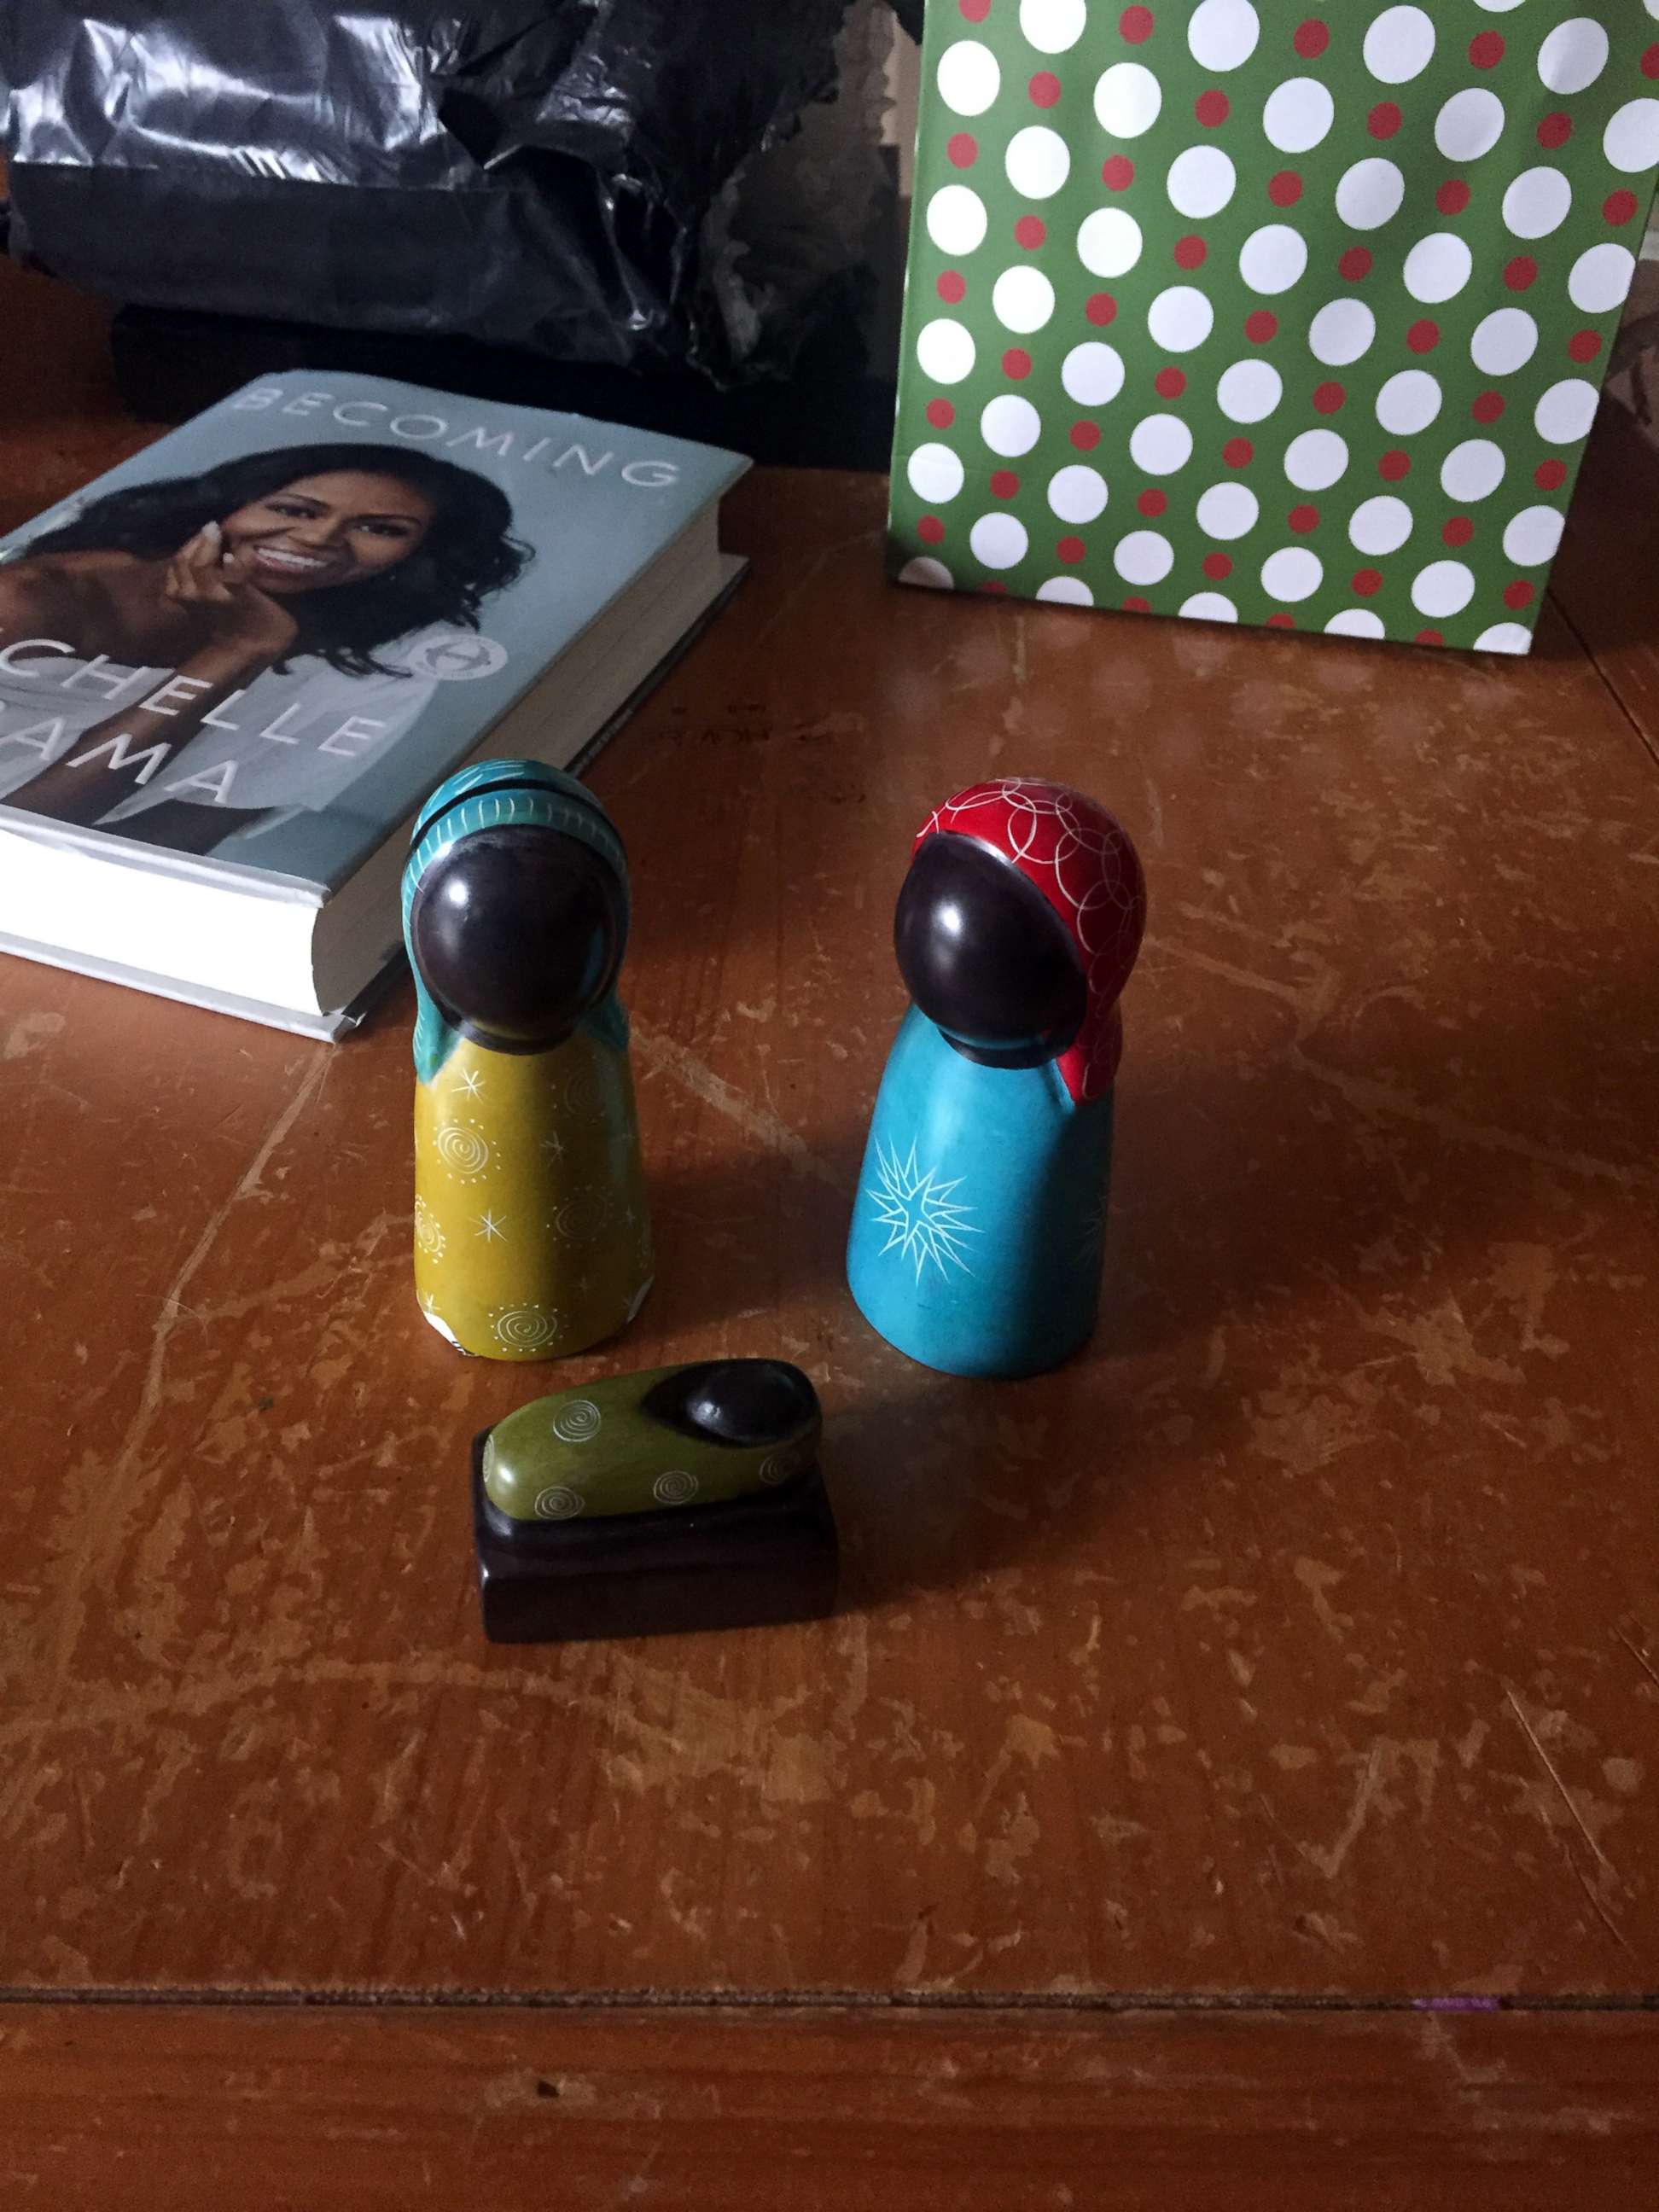 PHOTO: Fritz Richard's neighbor, Claire Lanfond, purchased this Kenyan Nativity set after hearing that Richard's Black Santa inflatable was destroyed.